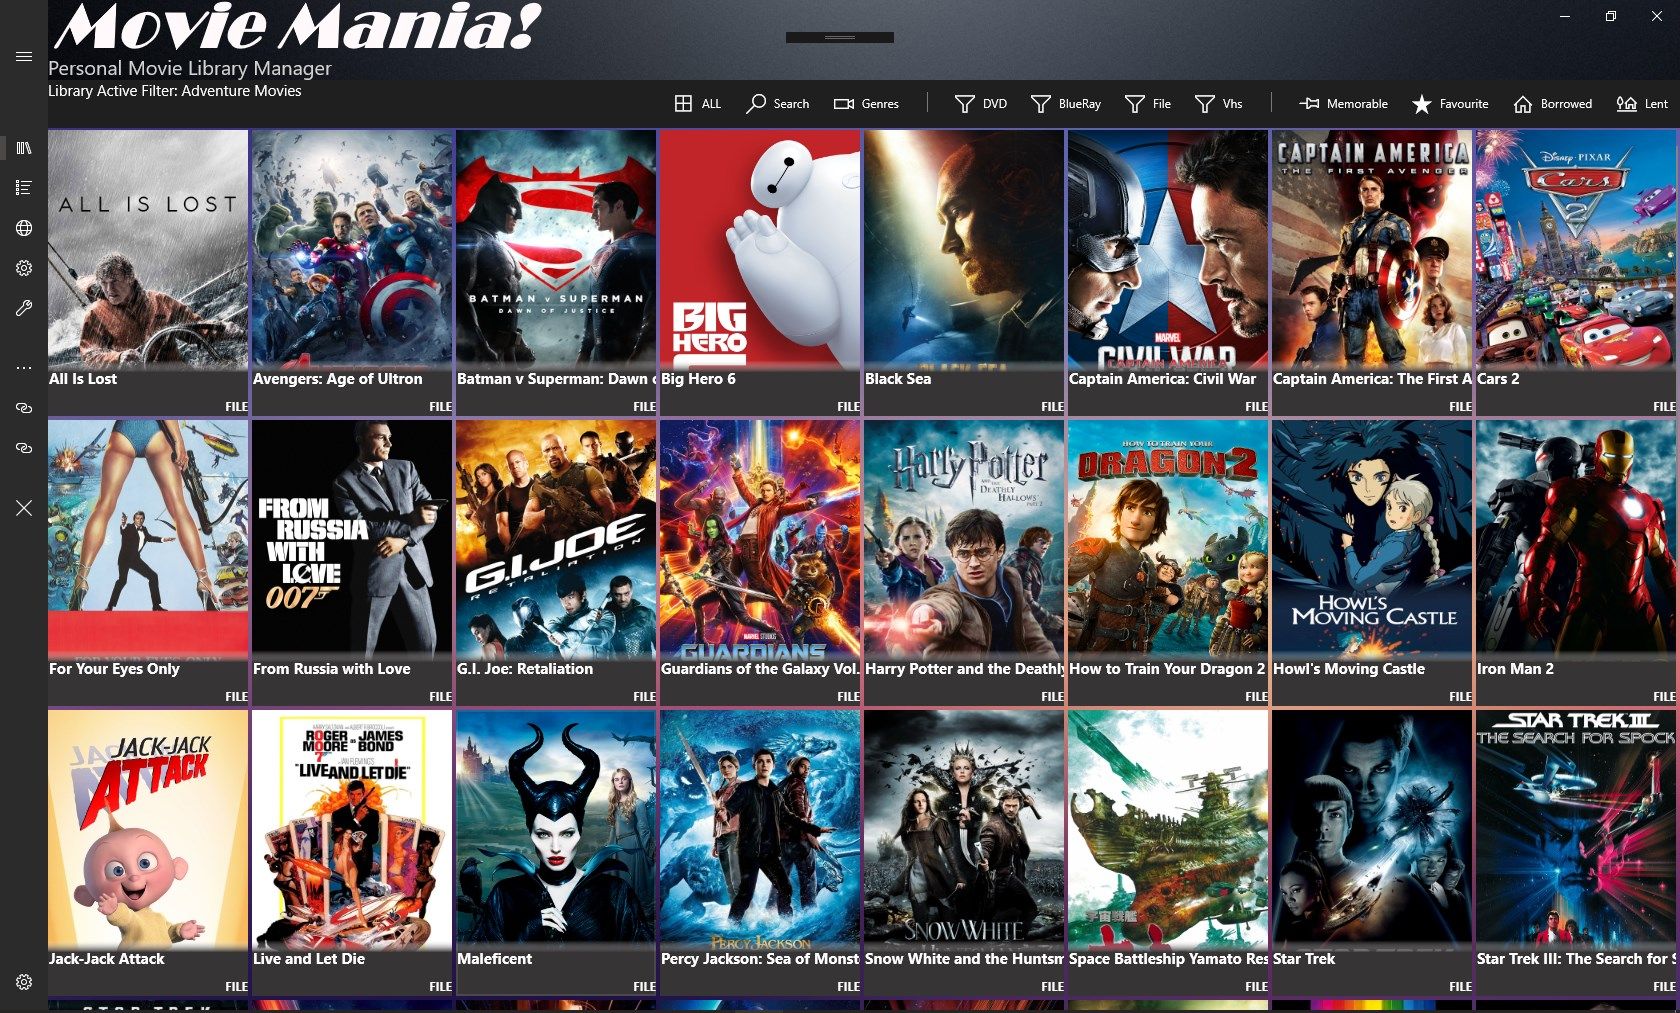 Search movies in your library and filter them for genre, favourites, mediatype and memorable movies.